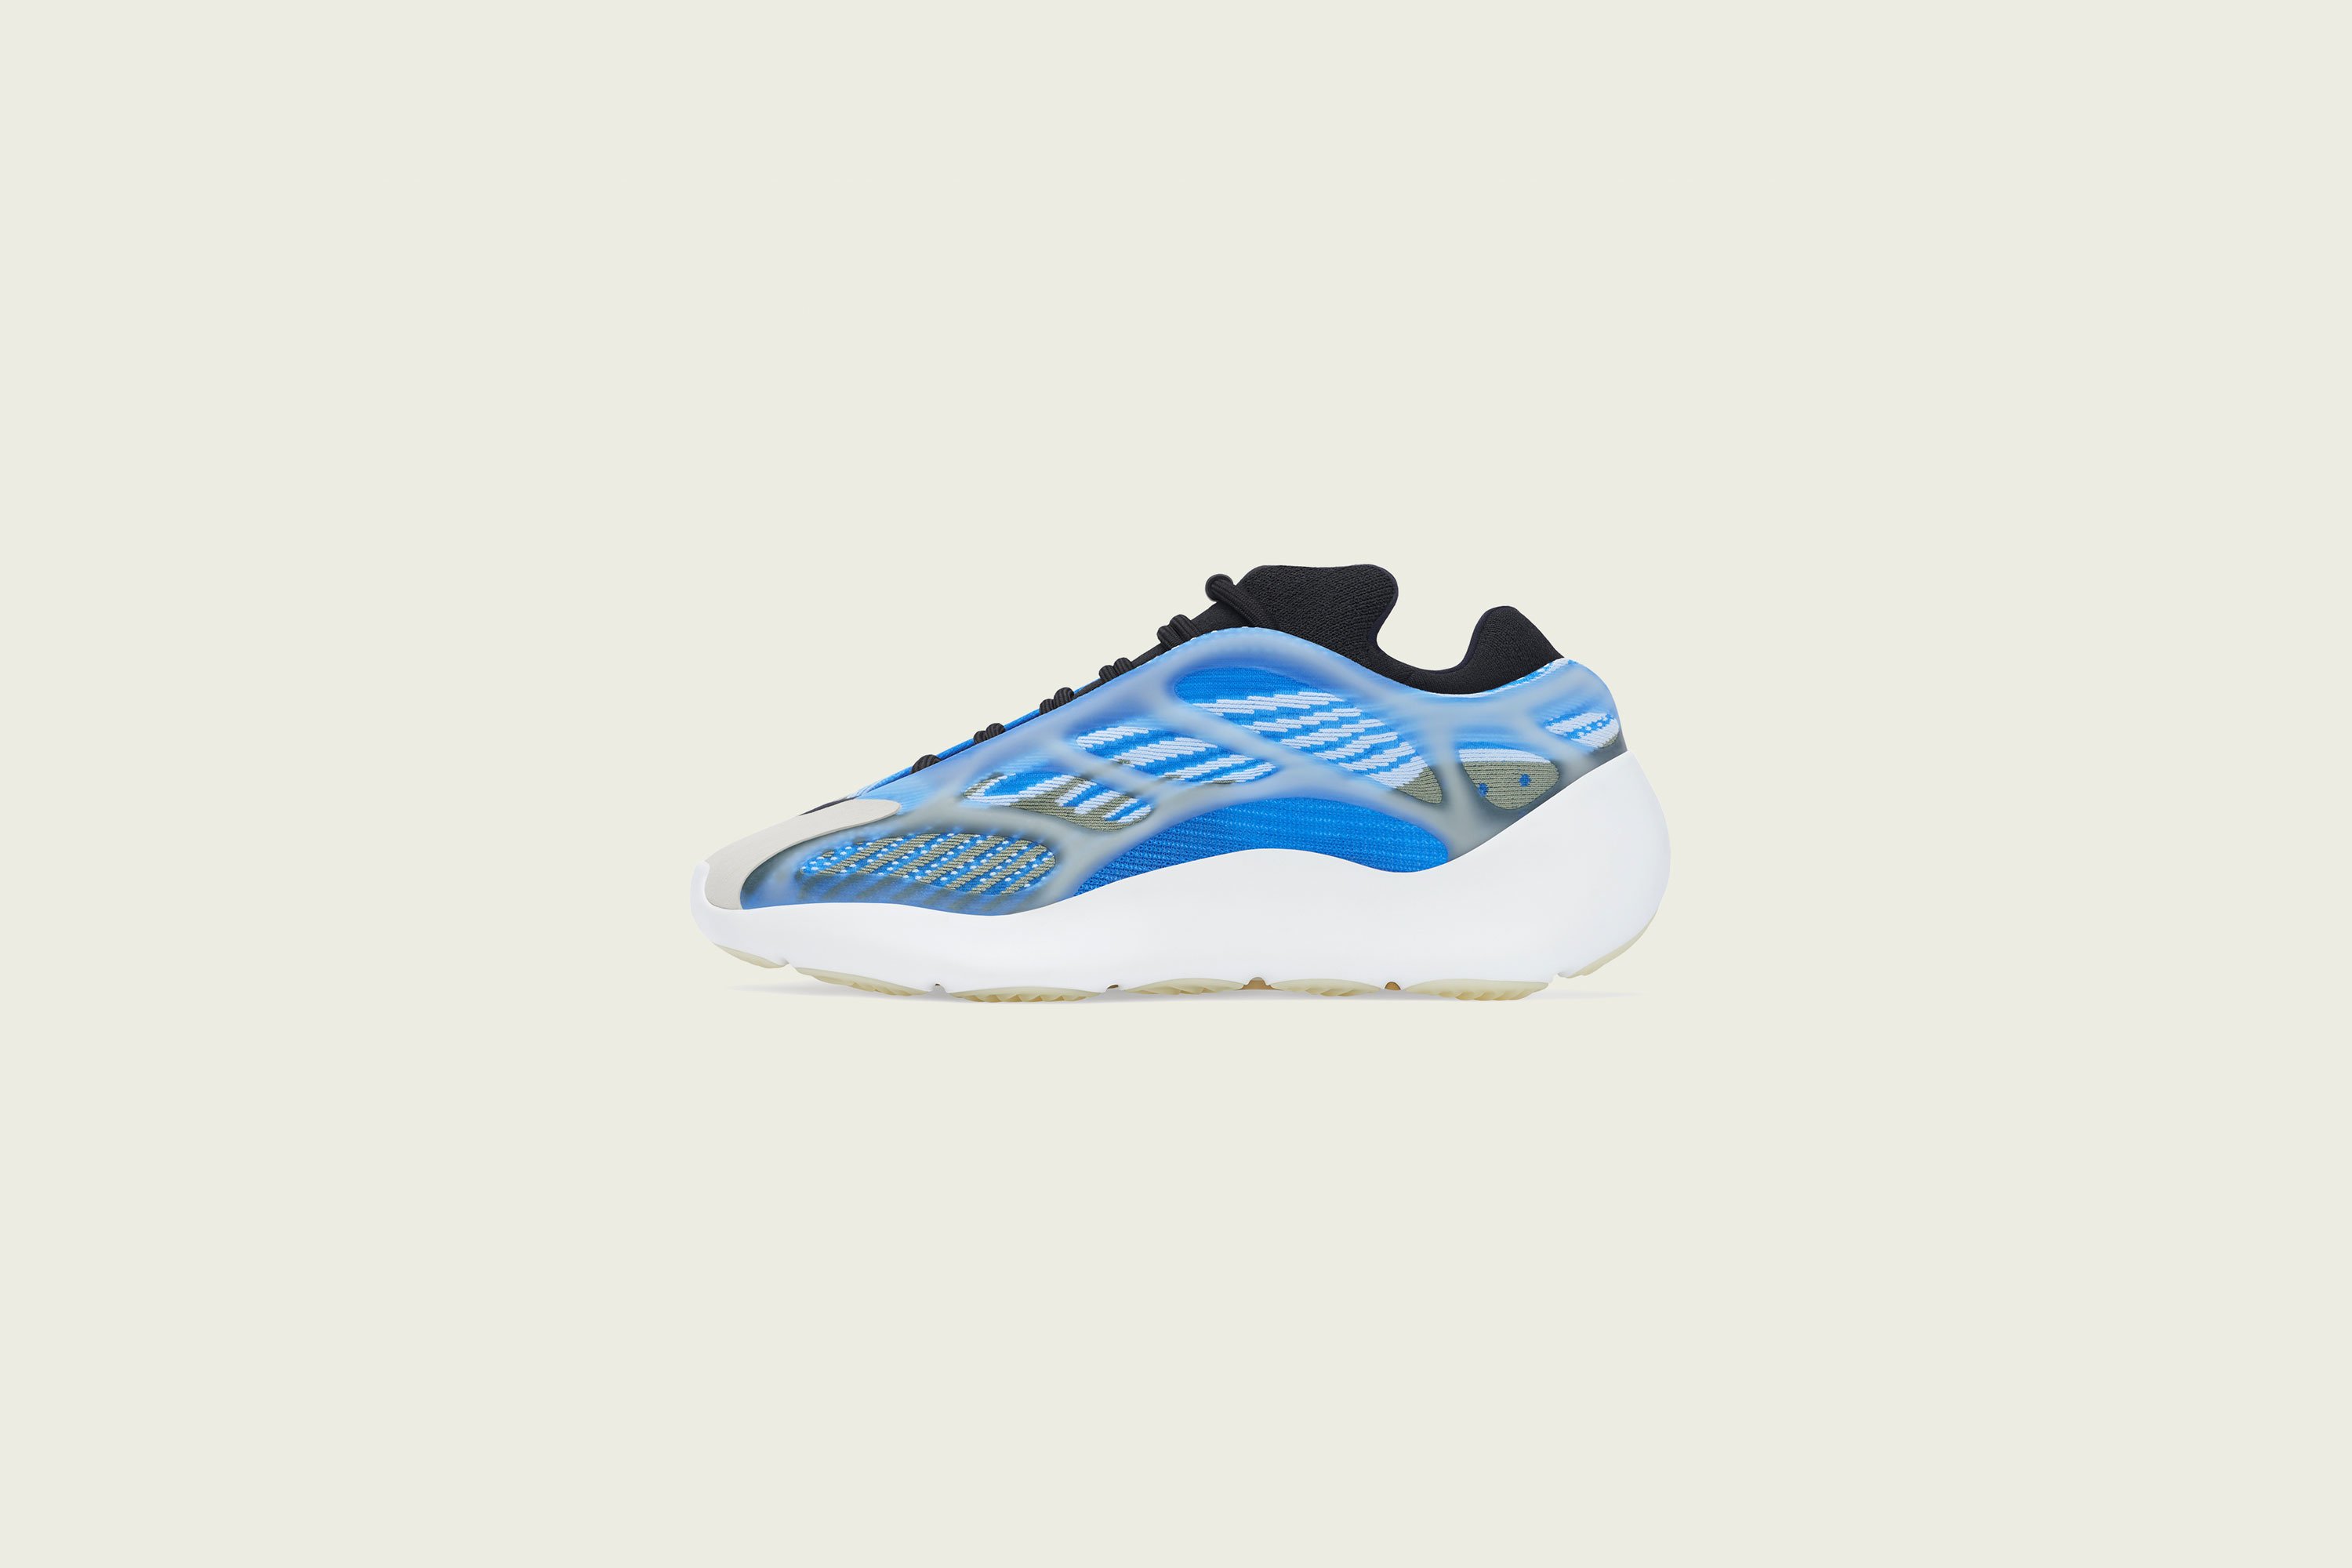 Up There Launches - adidas Originals Yeezy Boost 700v3 'Arzareth'